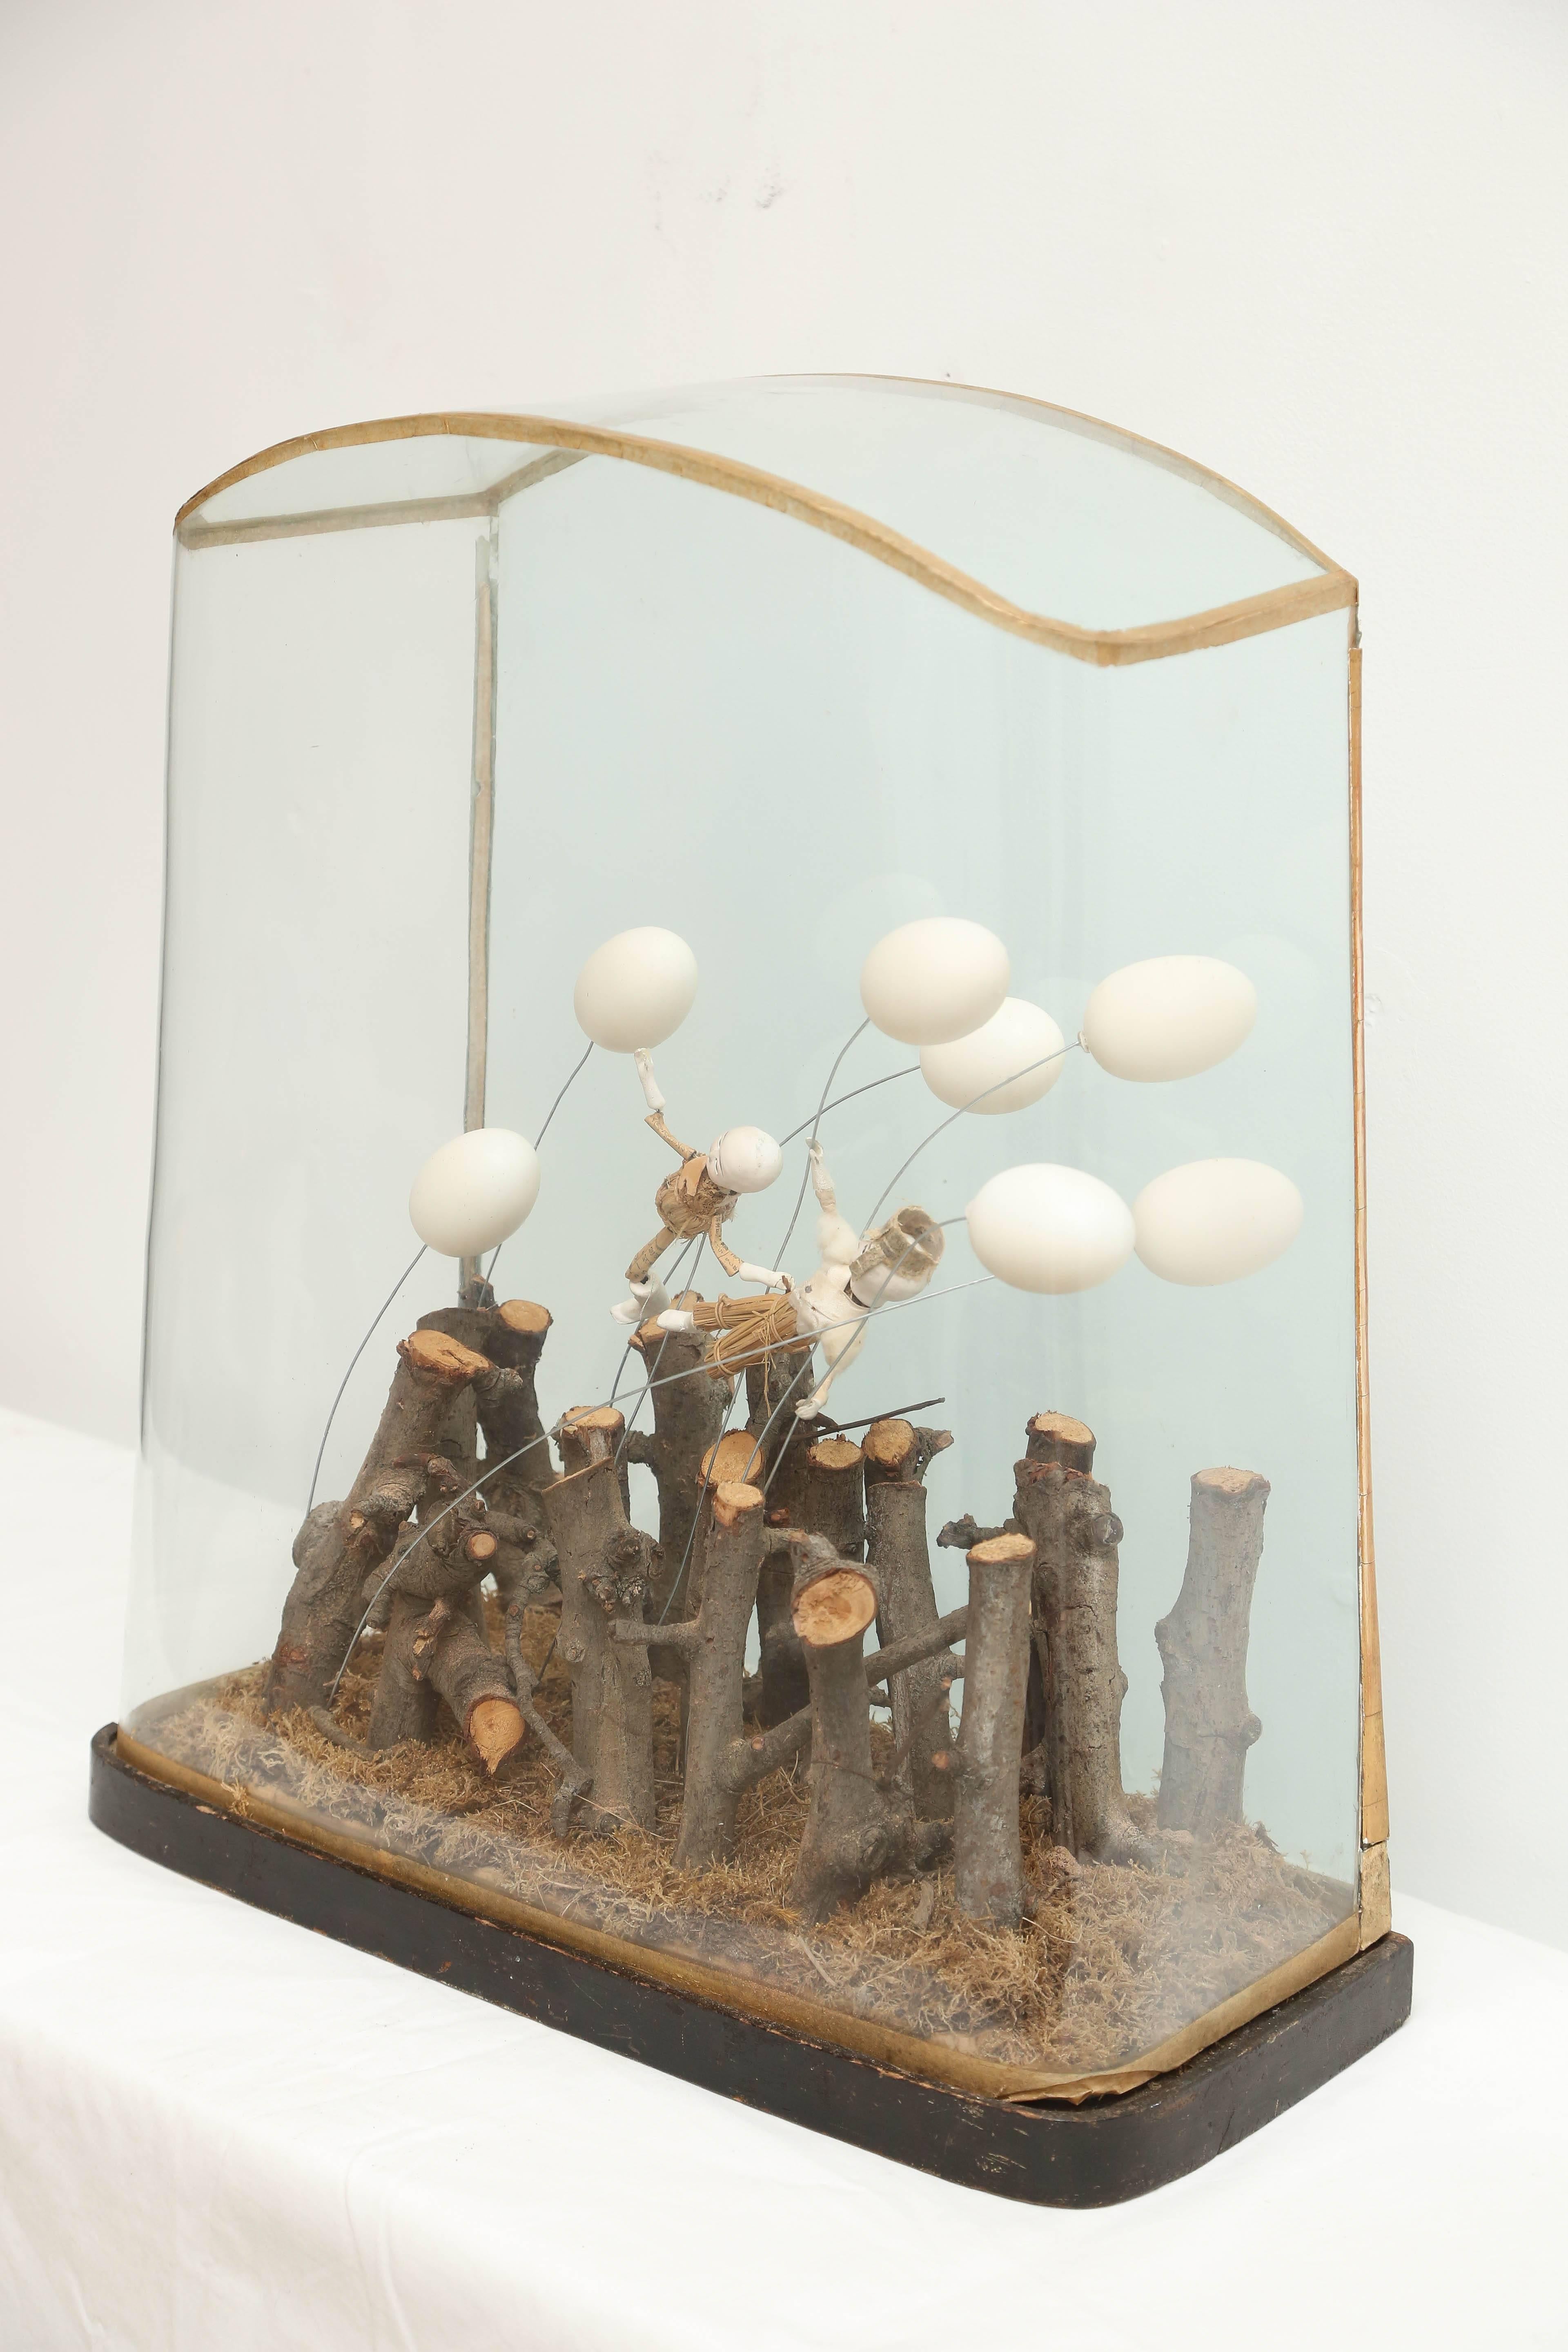 20th Century Whimsical Fantasy Tabletop Diorama For Sale